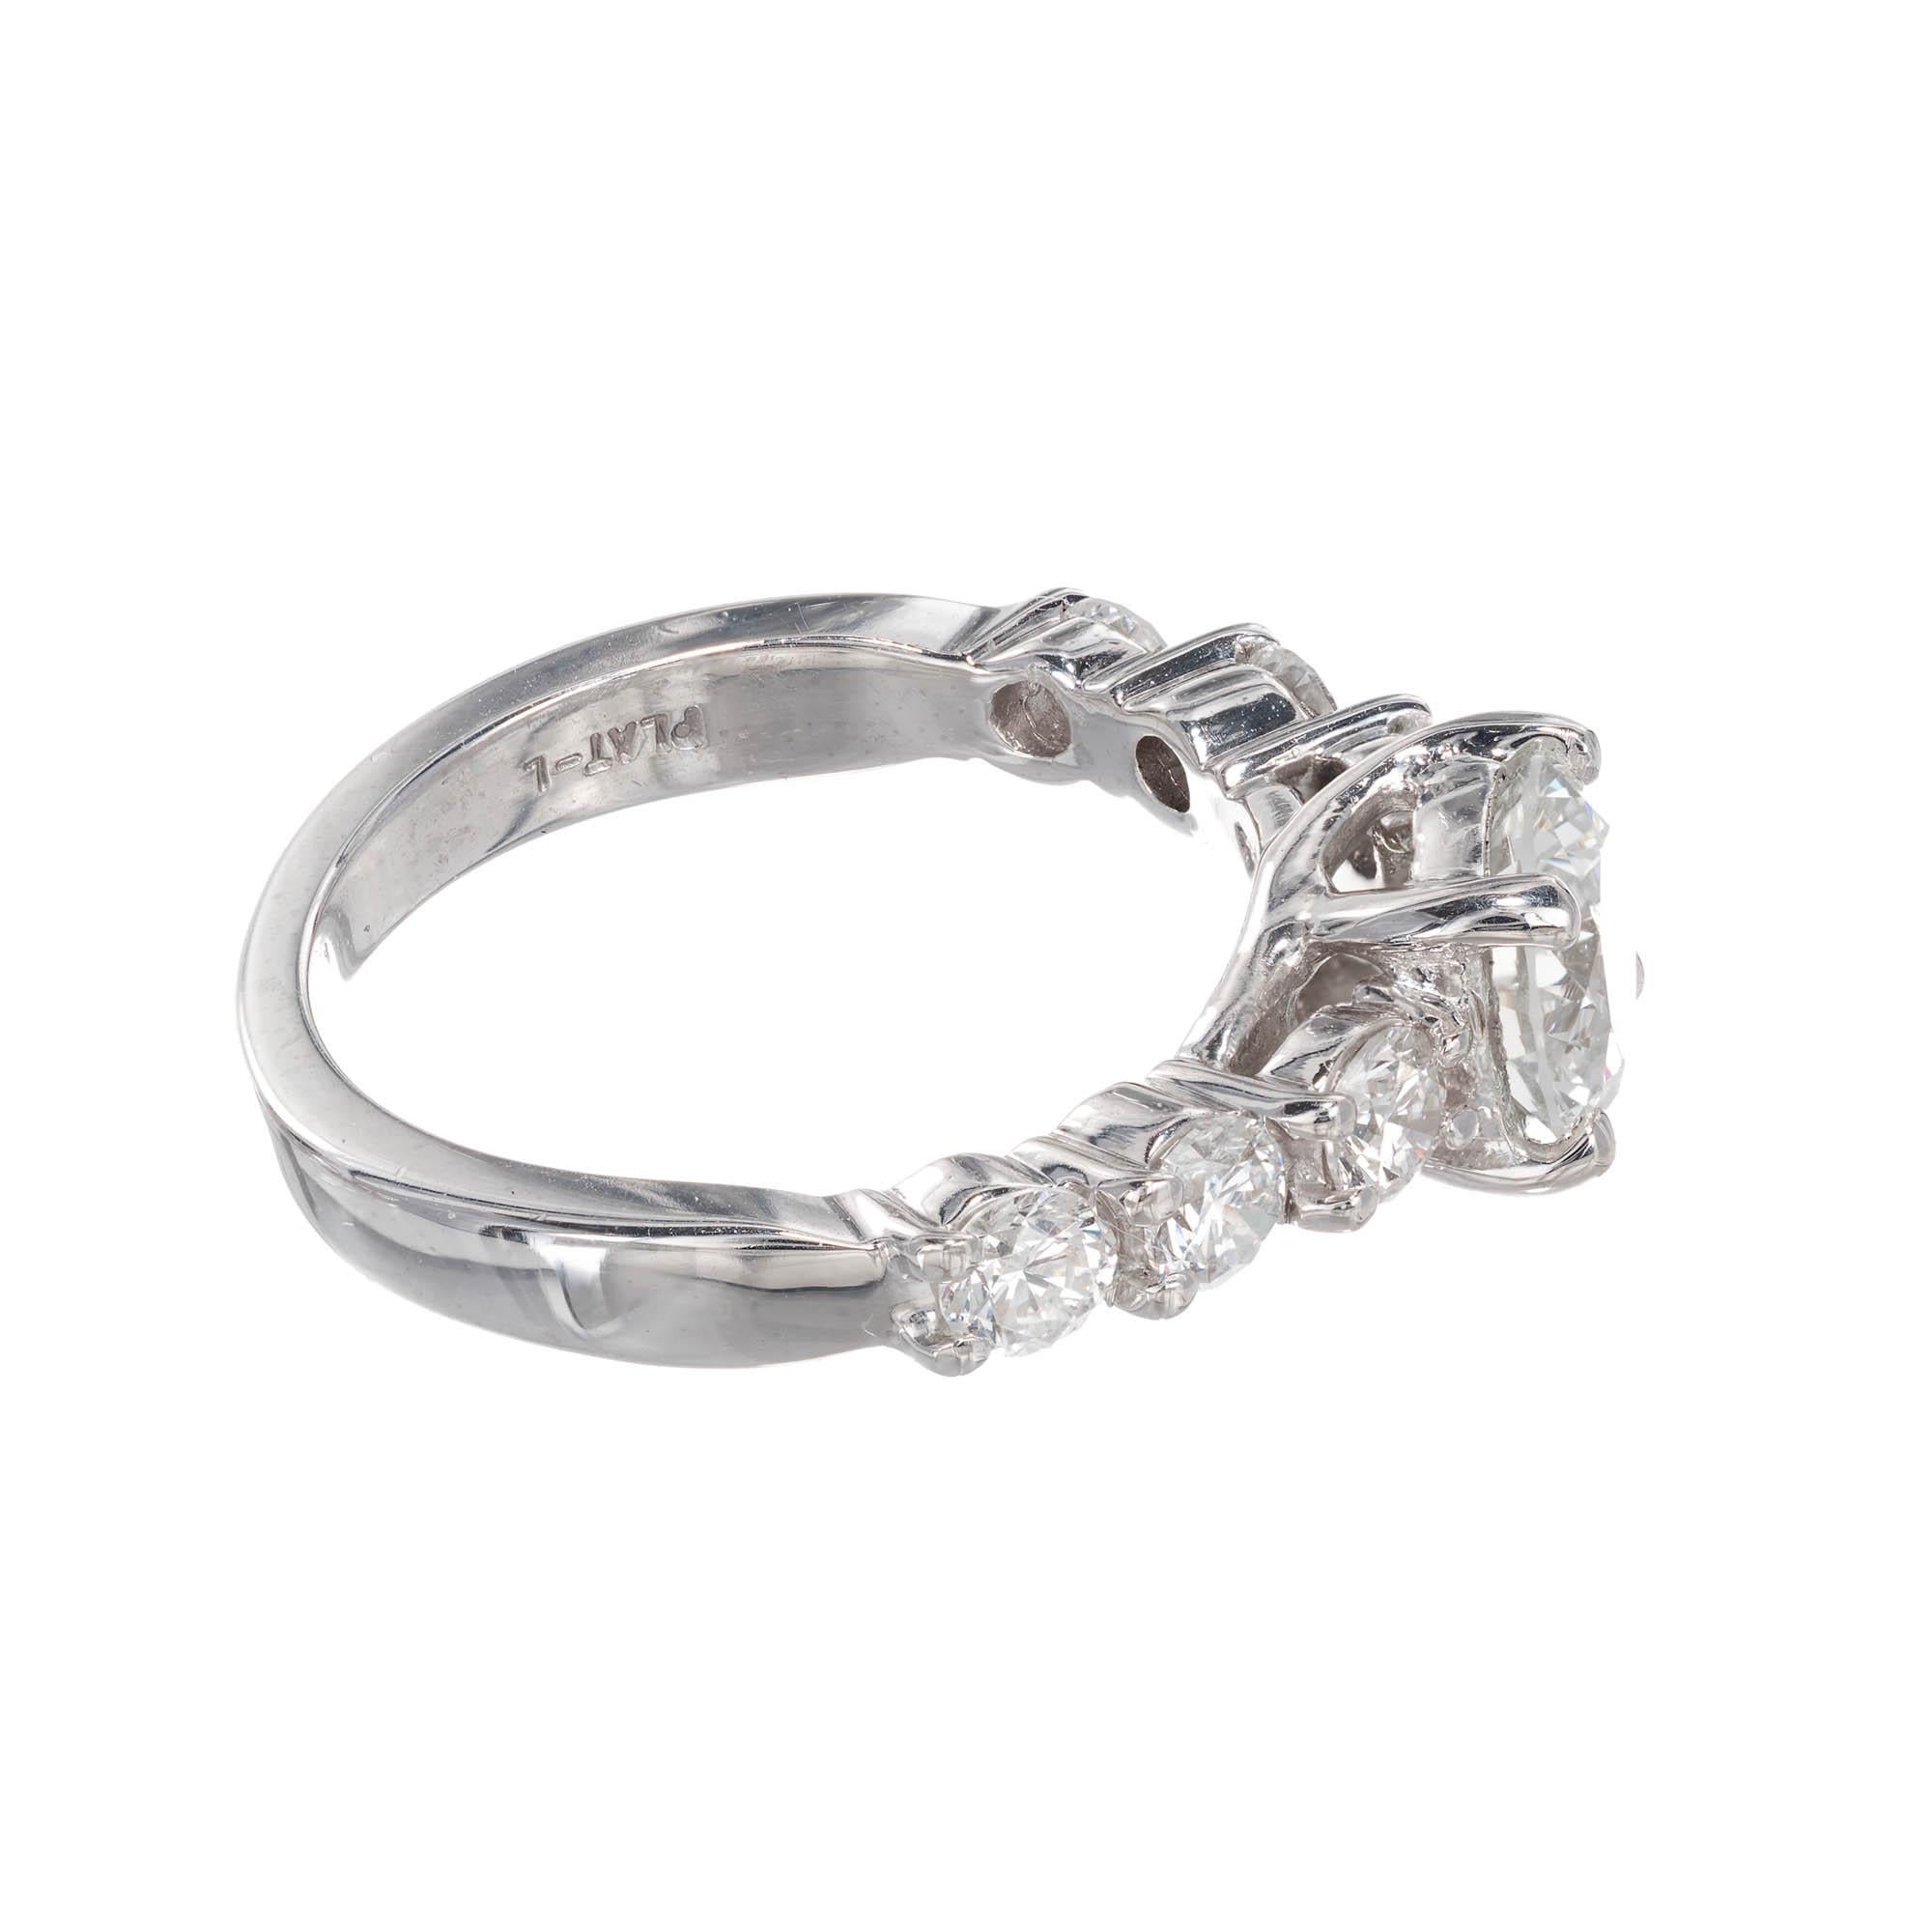 Platinum diamond engagement ring. Center round brilliant cut diamond is accented with three additional round brilliant cut diamonds on either side in a step platinum setting.

1 round brilliant cut H-I VS diamonds Approximate 1.01 carats
6 round